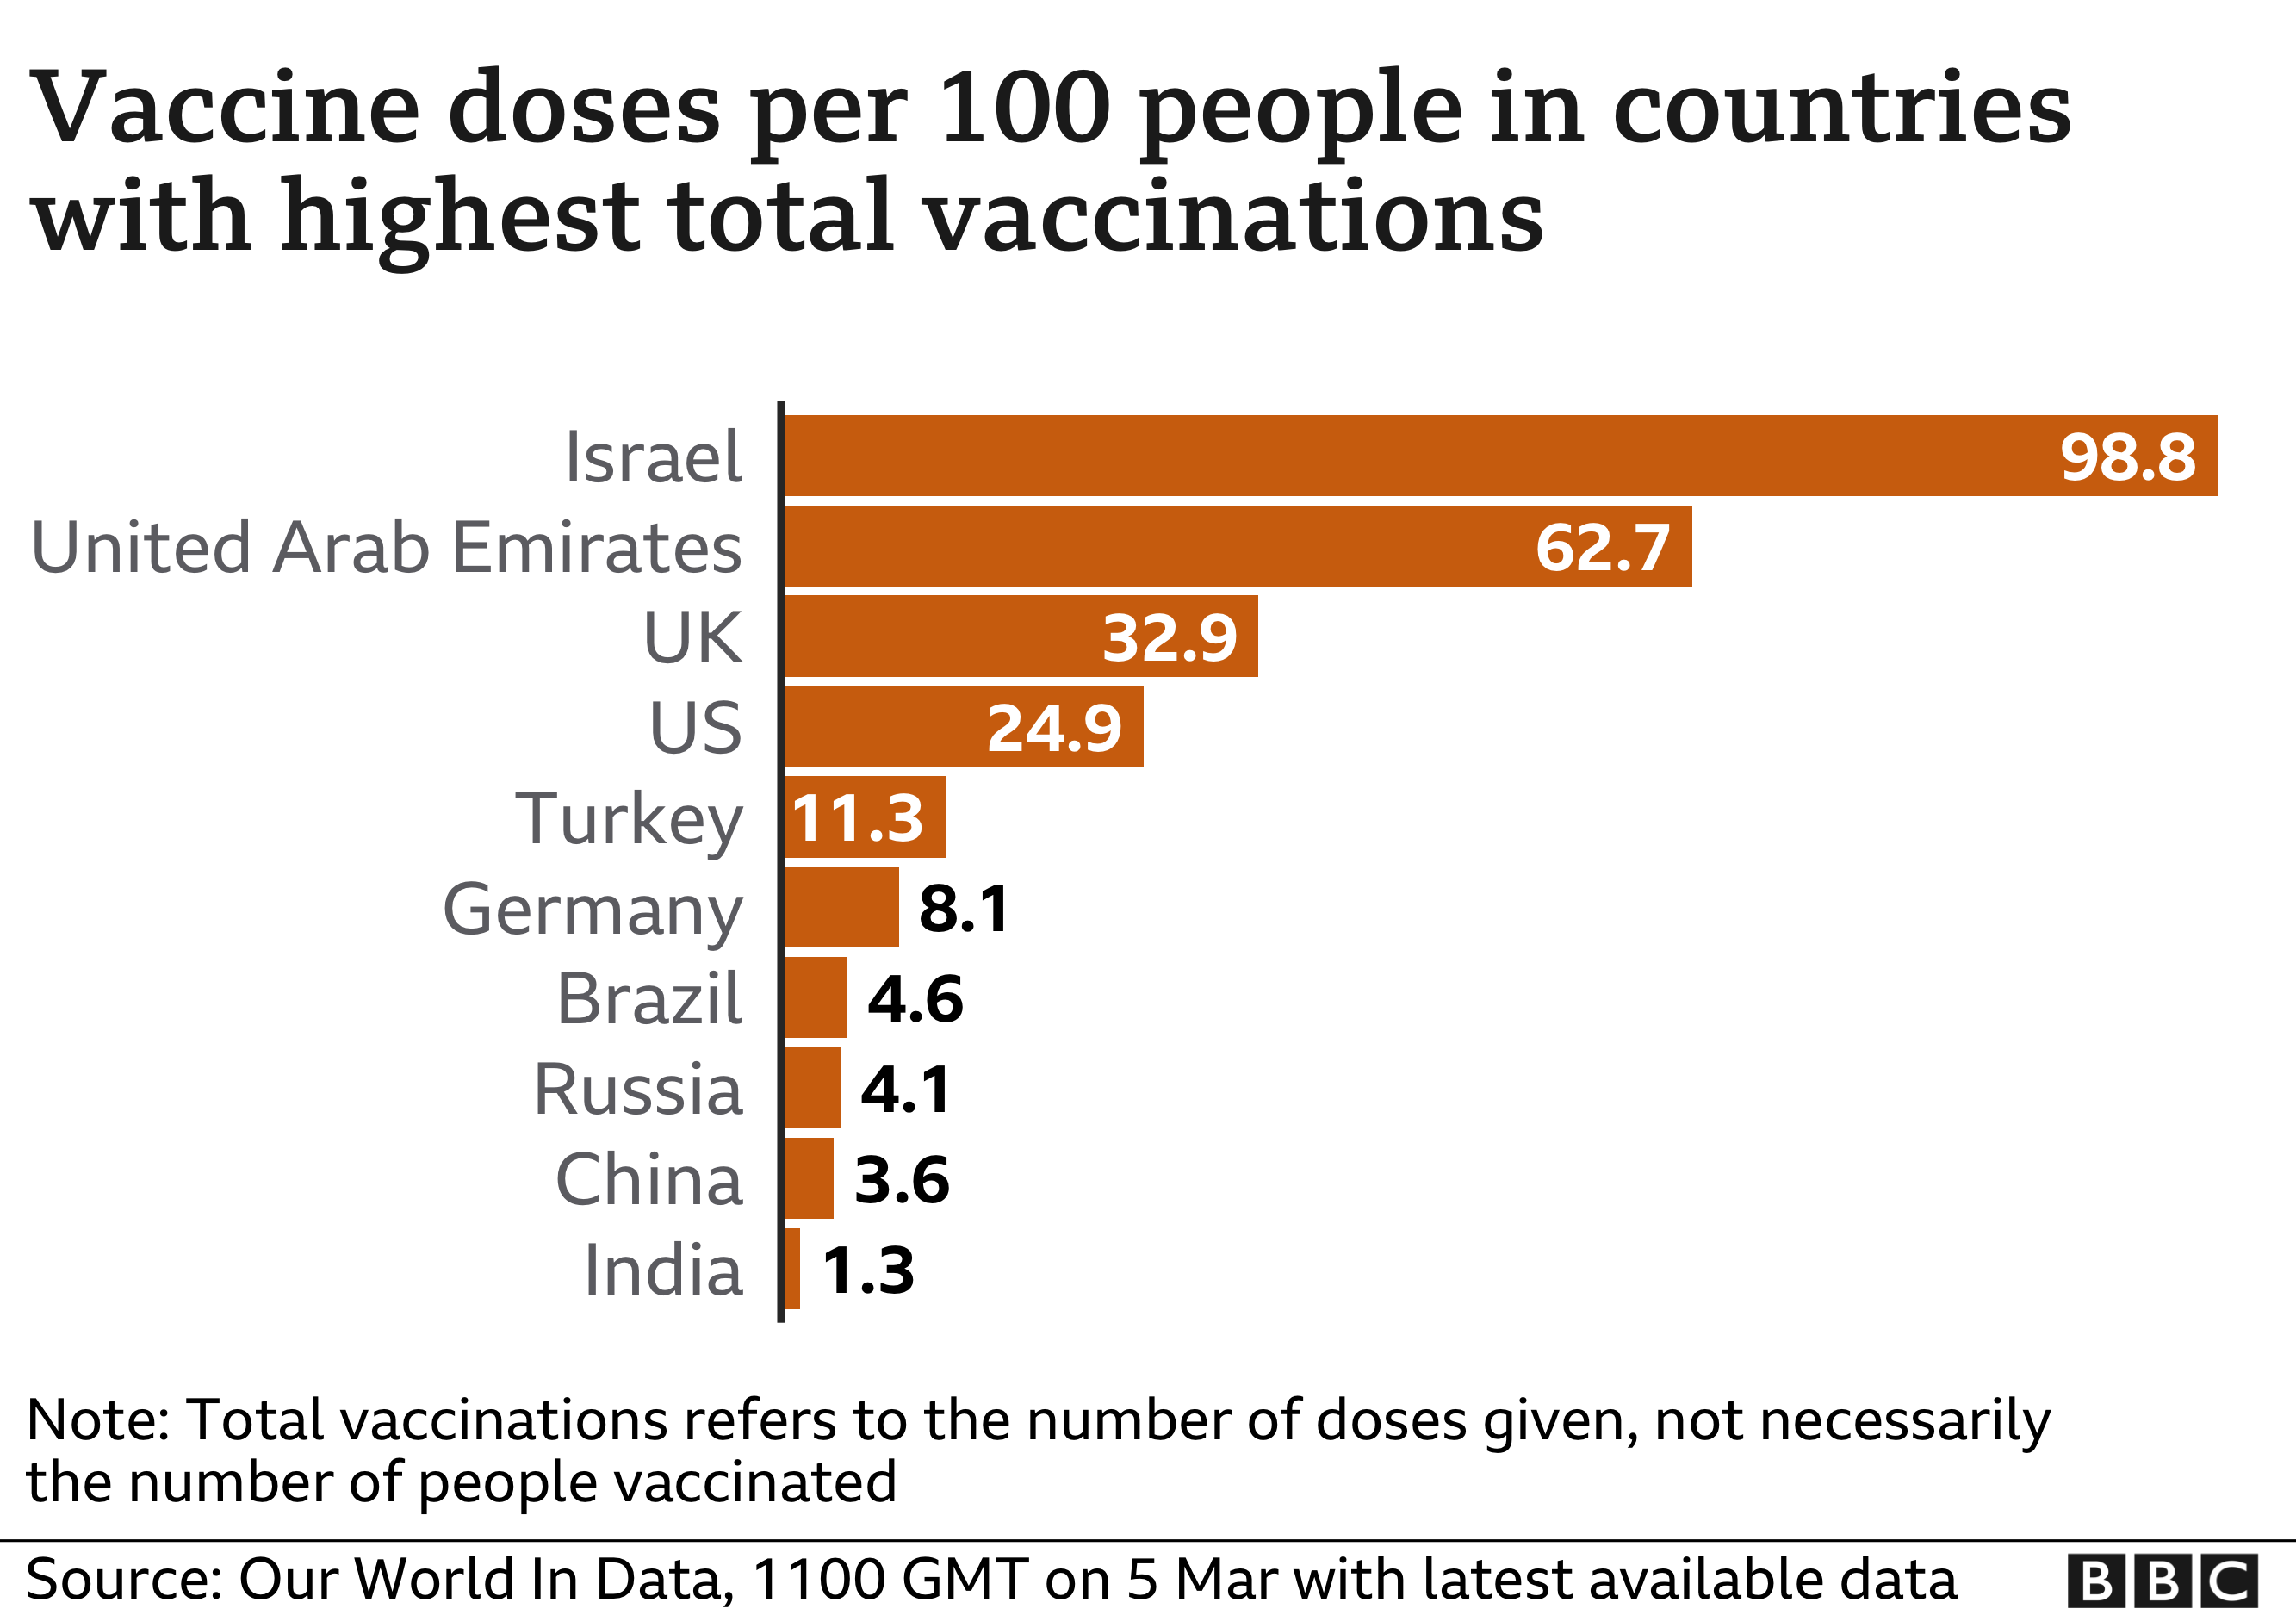 Chart showing vaccine doses per 100 people in countries with the highest total vaccinations. Updated 5 March.